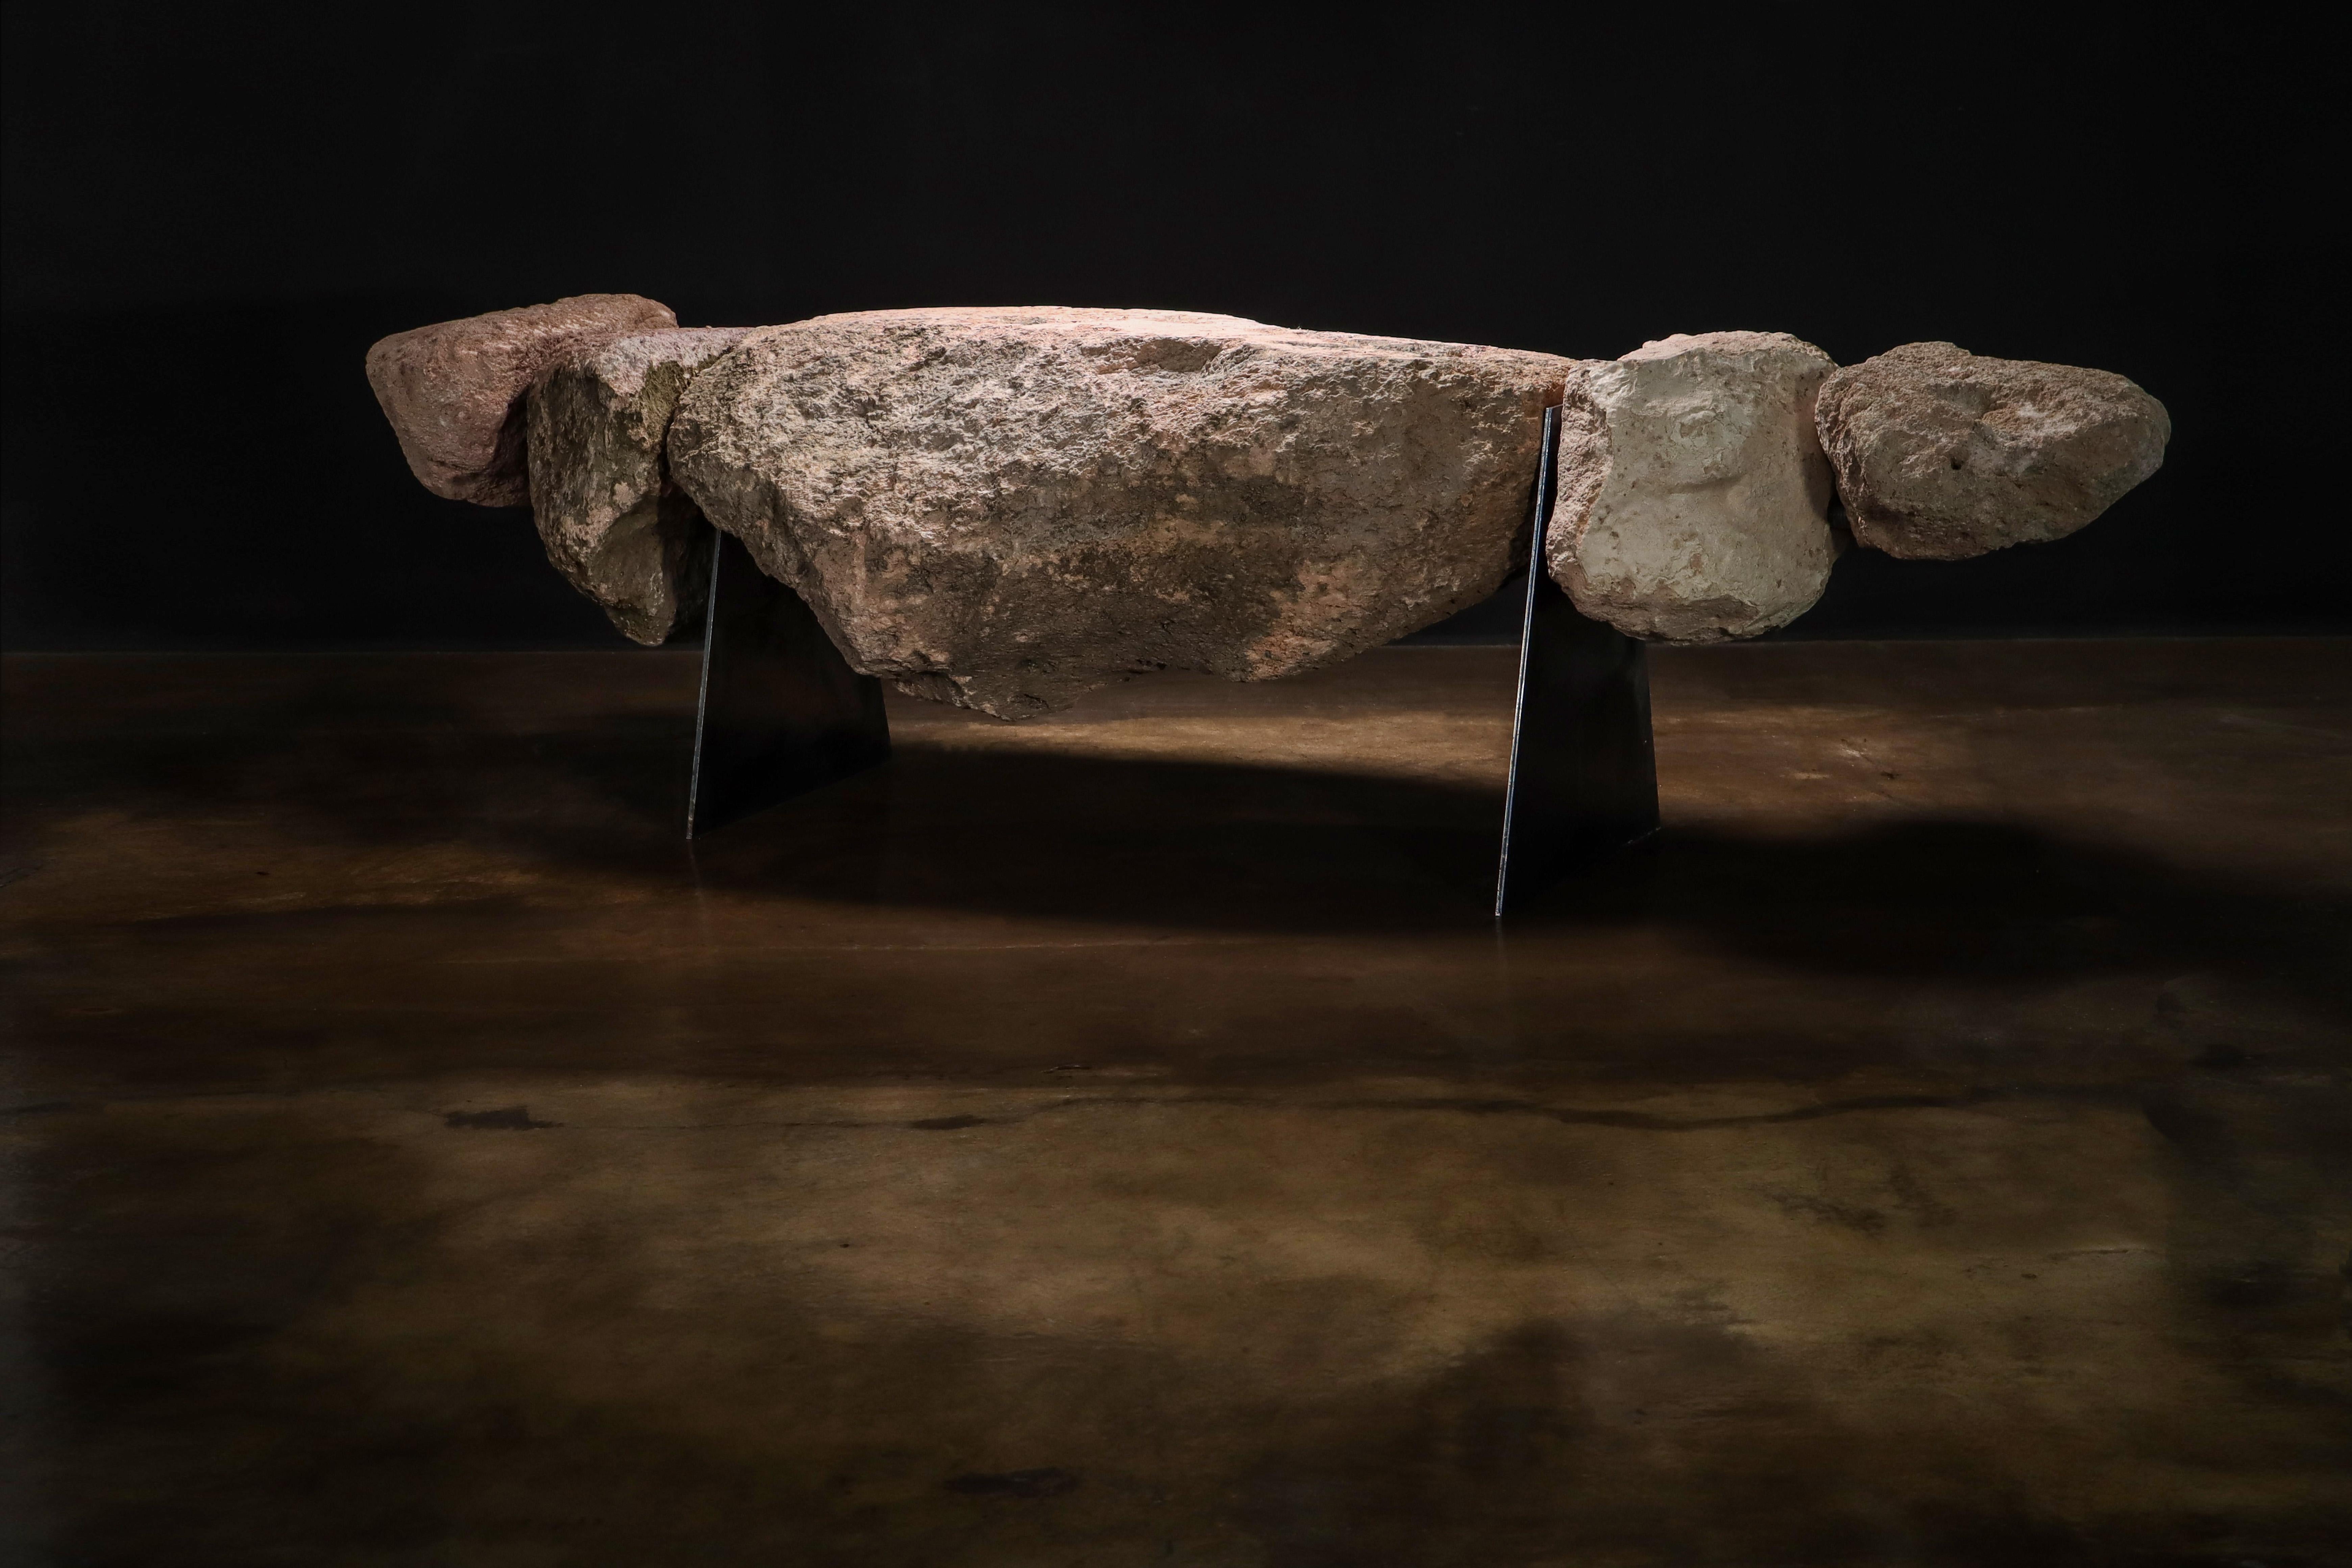 One-of-a-kind functional art sculptural bench from volcanic rock and iron by William Stuart by and for Costantini, Fortezza.

The first piece of a new collection of collectible design comprising naturally formed volcanic rocks from Argentina and an